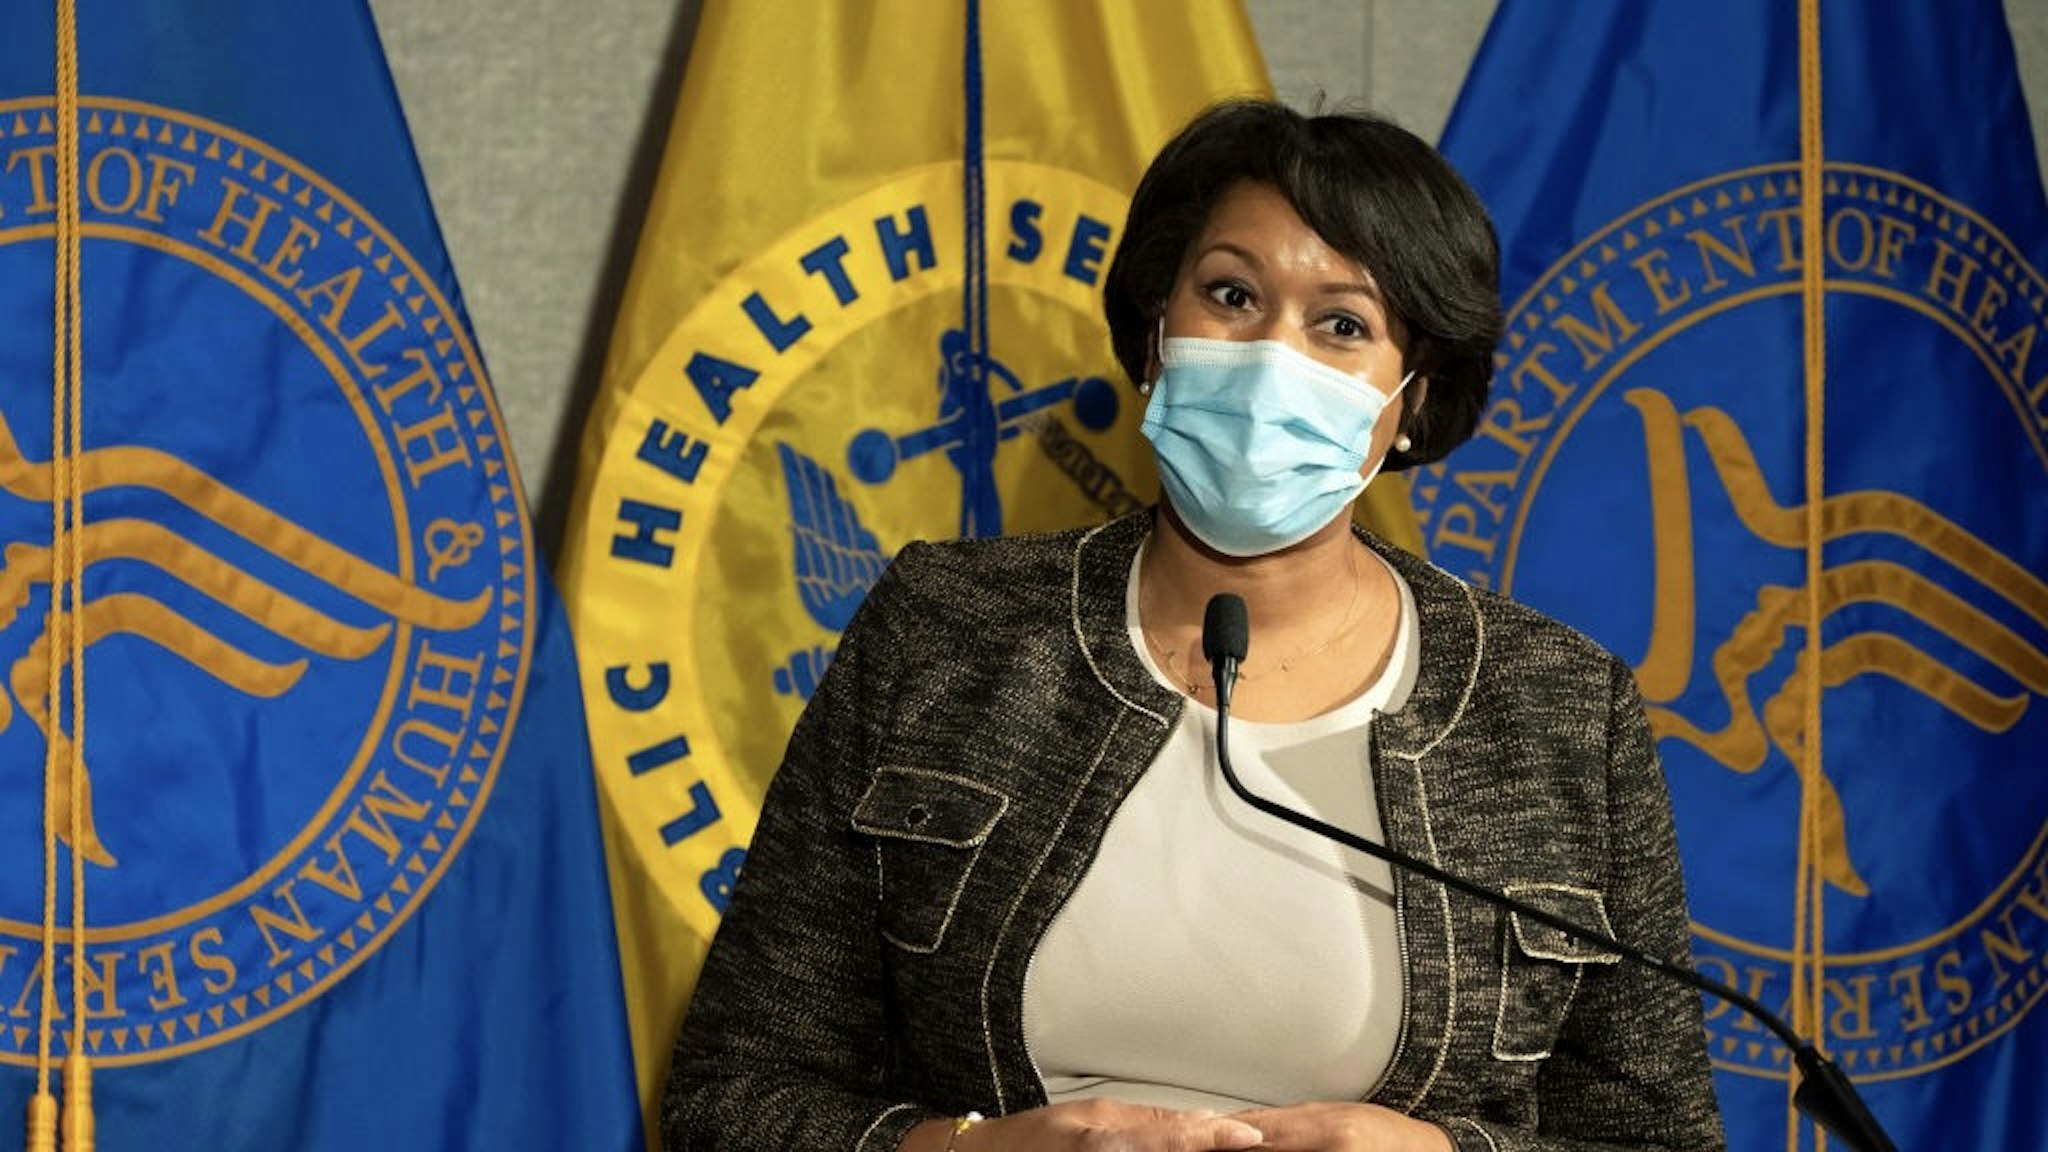 District of Columbia Mayor Muriel Bowser speaks during a news conference about the COVID-19 vaccine with Health and Human Services Secretary Alex Azar and Surgeon General Jerome Adams at George Washington University Hospital, Monday, Dec. 14, 2020, in Washington